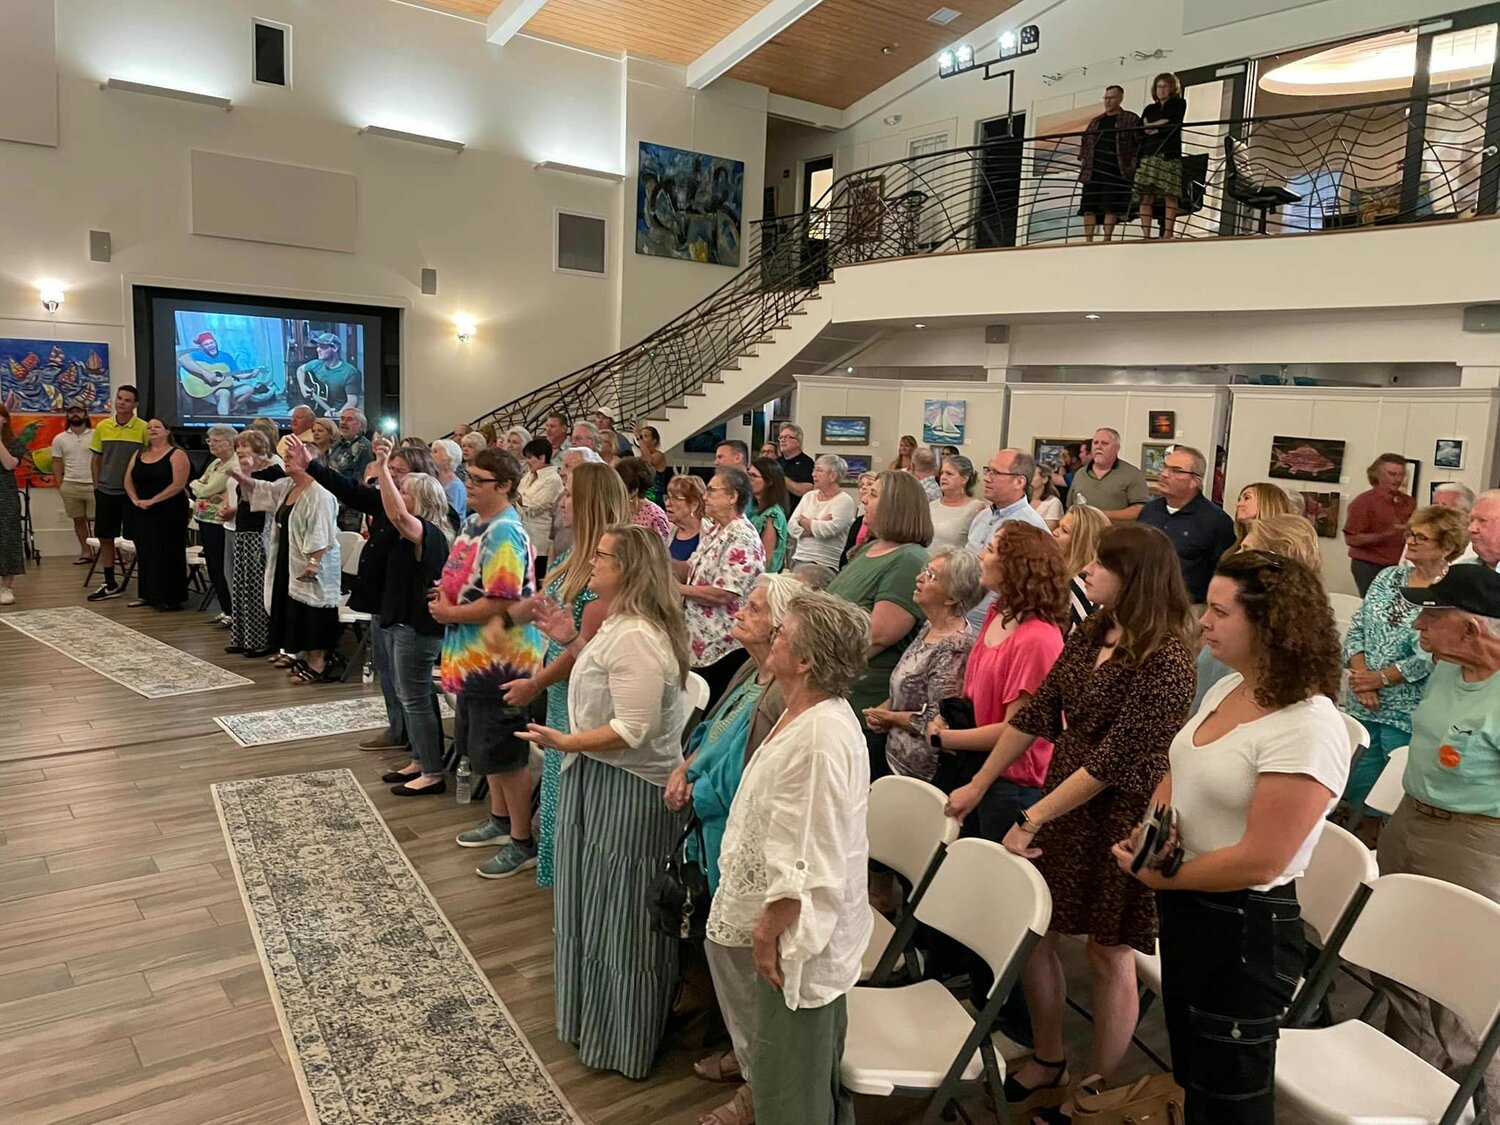 The Four A Change concert benefit saw more than 150 community members come out to show support for the Litton family and enjoy a fun evening of music.